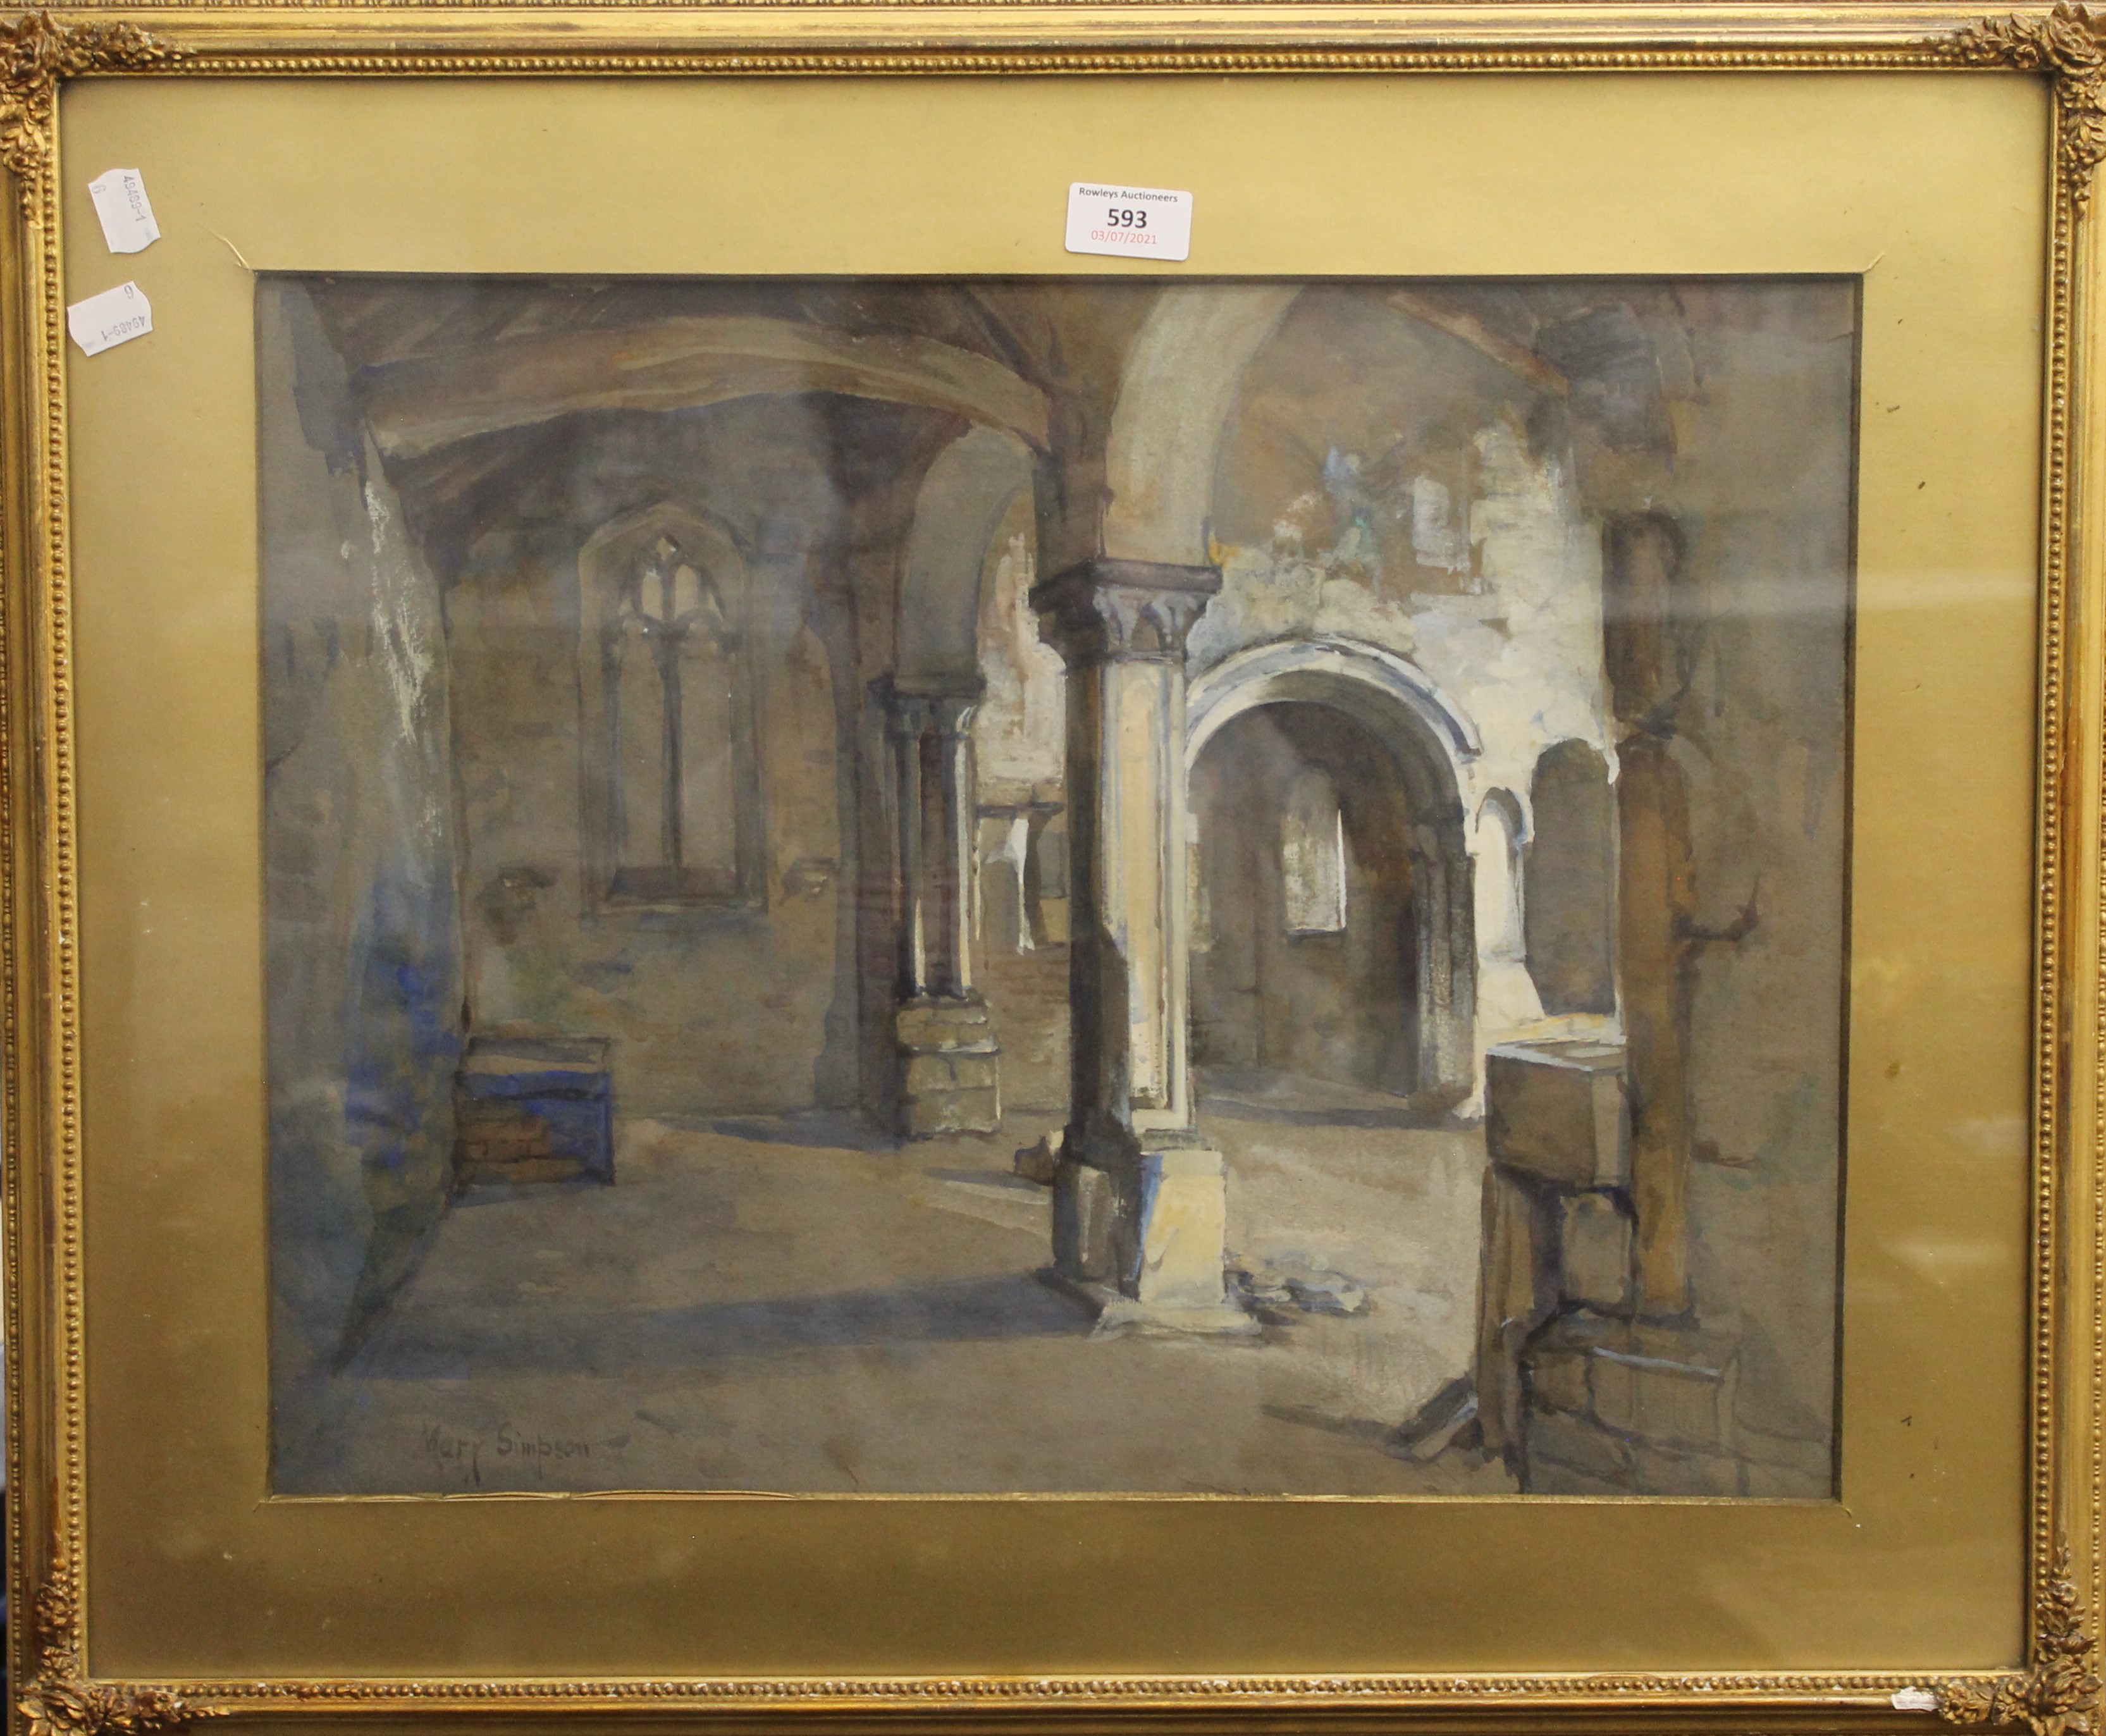 MARY SIMPSON, Gothic Cellar, watercolour, signed, framed and glazed. 49.5 x 38 cm. - Image 2 of 2